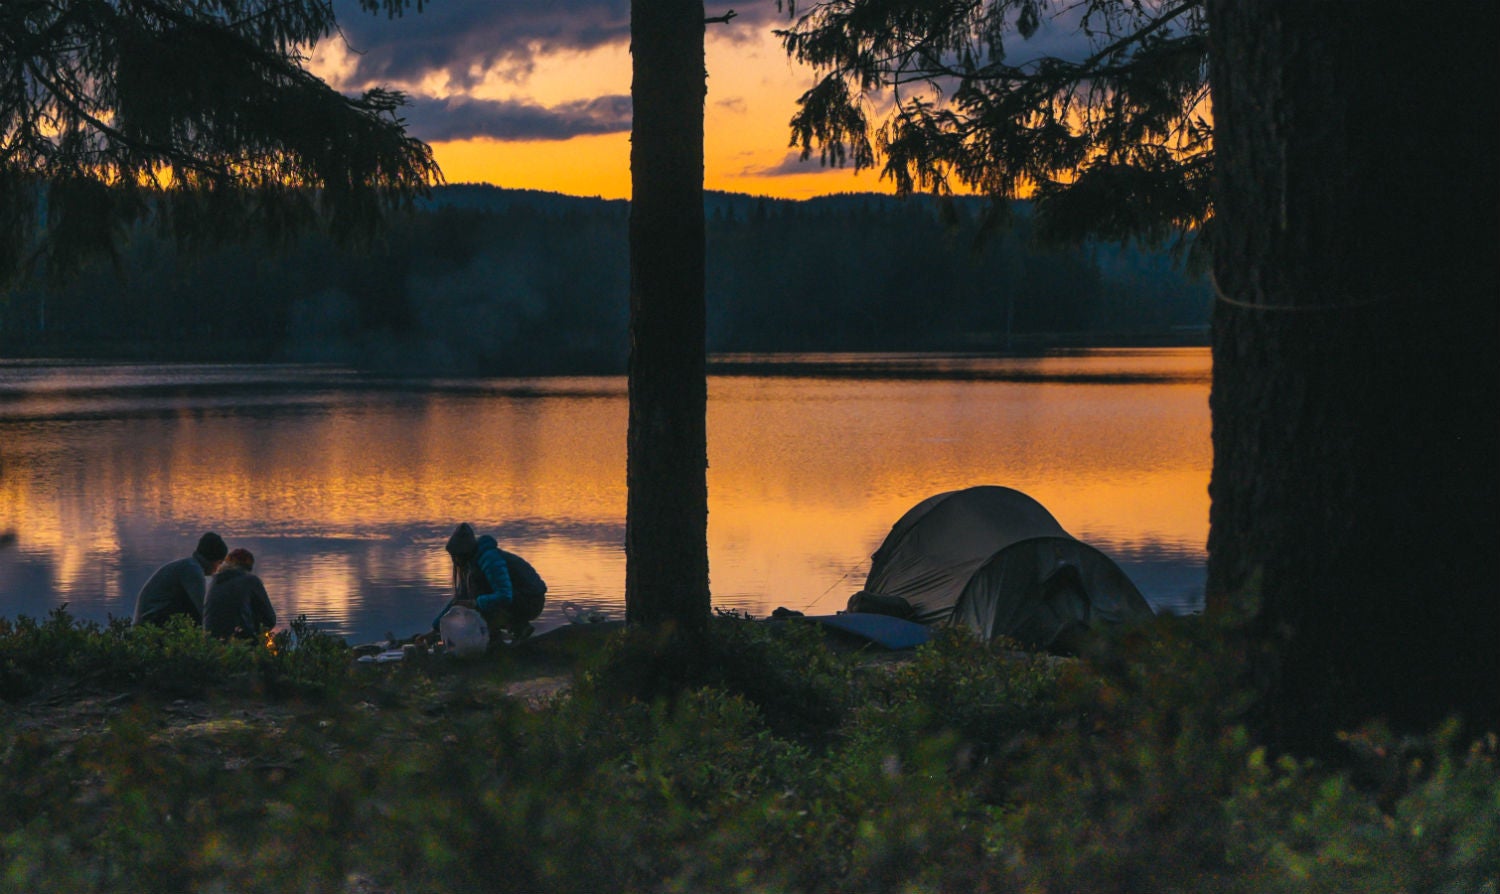 camping terms and other outdoor lingo